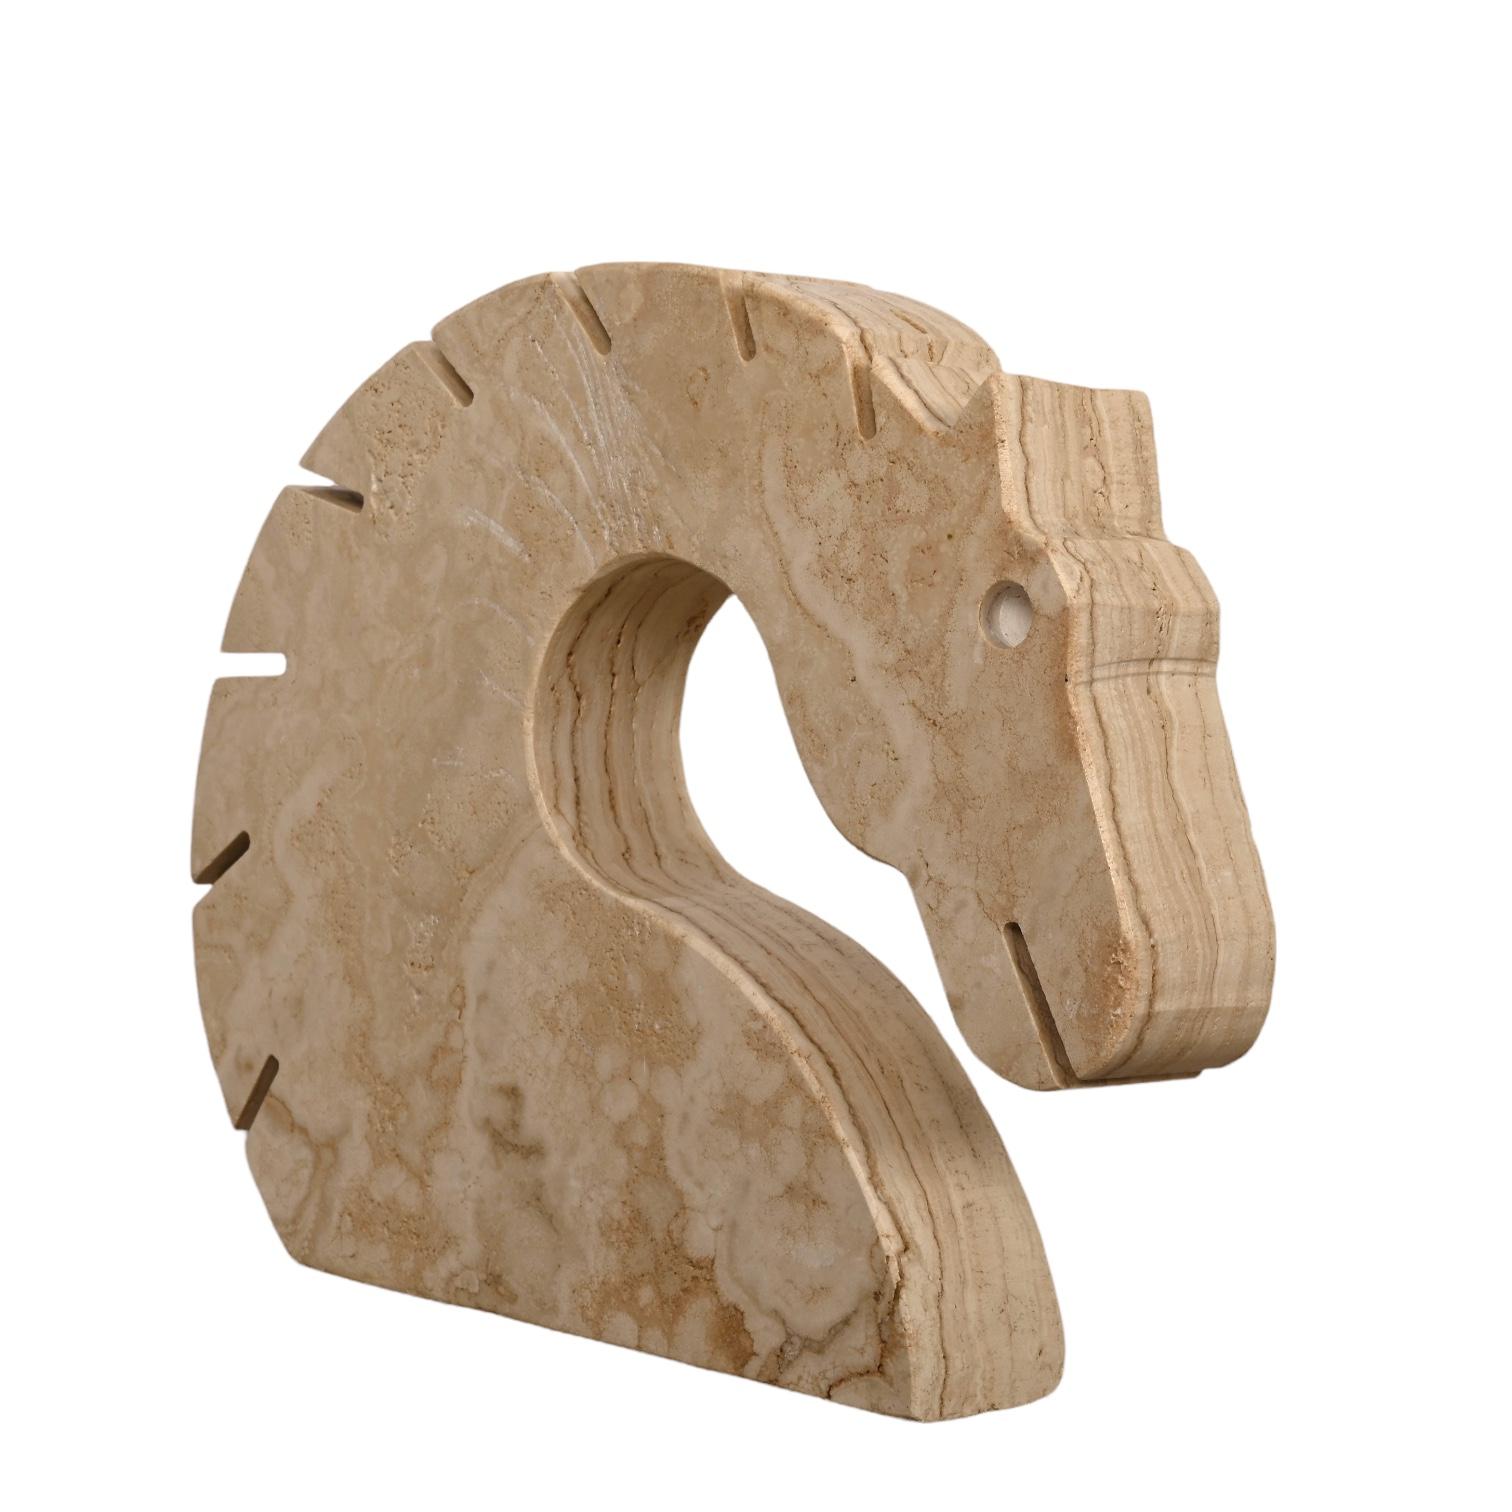 Italian Travertine Marble Horse Sculpture, Fratelli Mannelli, Italy, 1970s For Sale 2